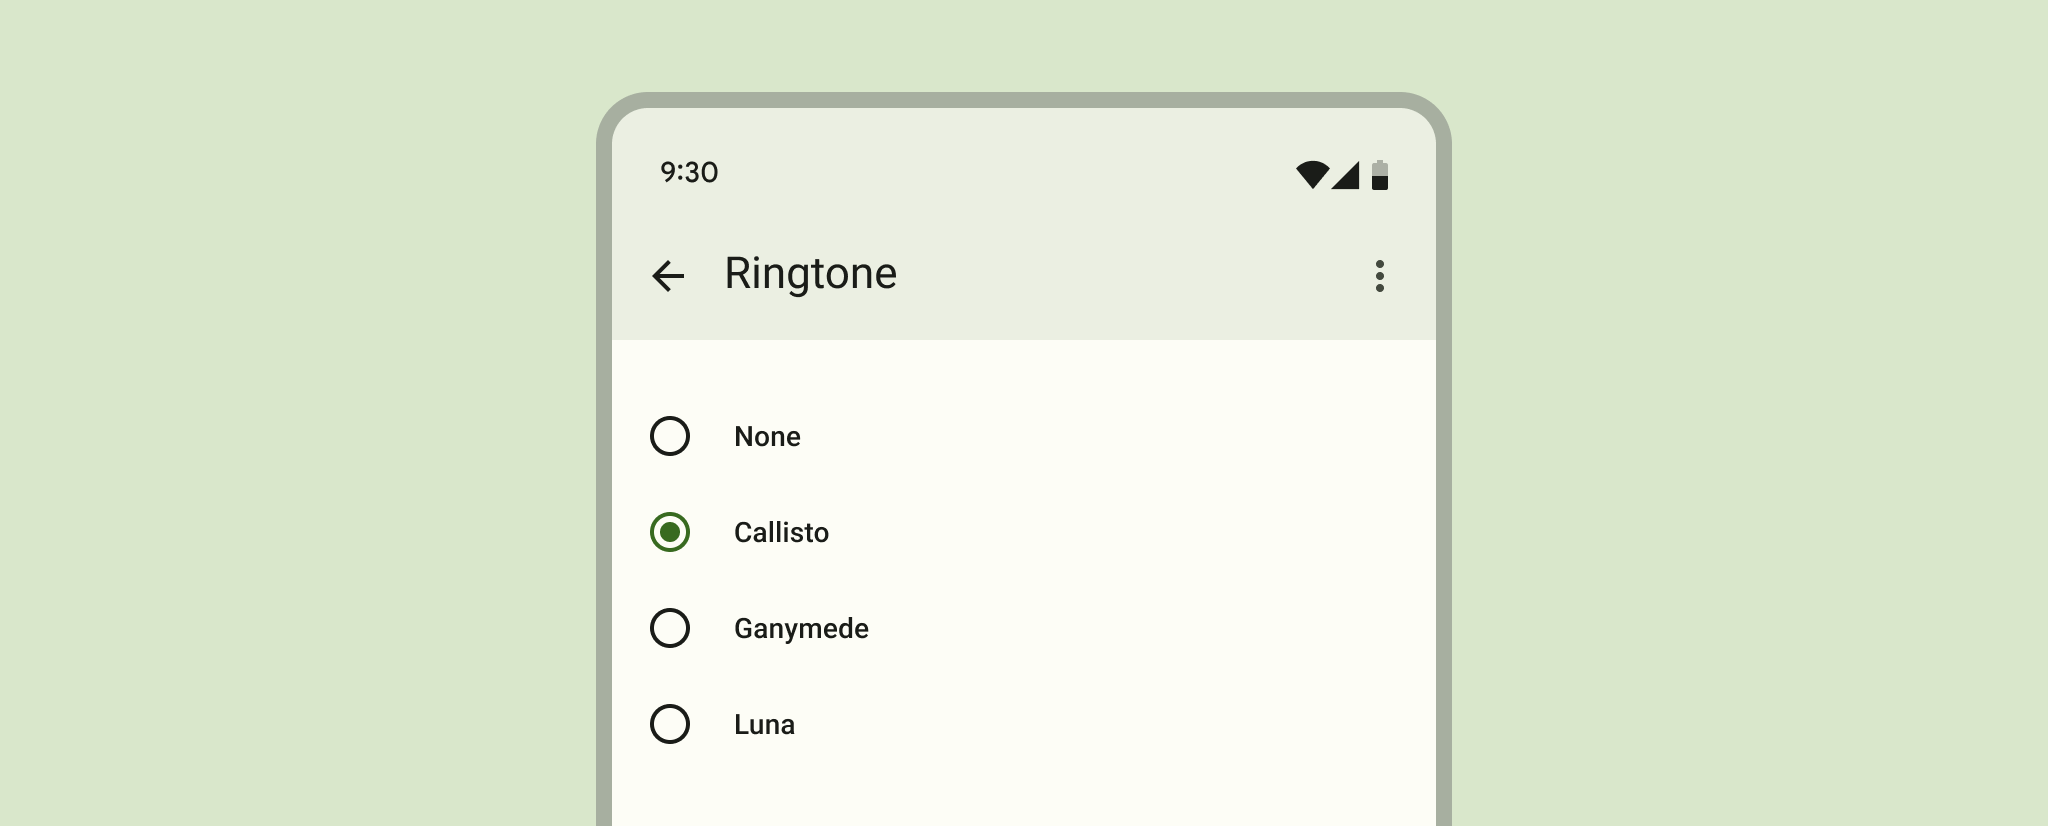 A list of items with radio buttons and one selected.